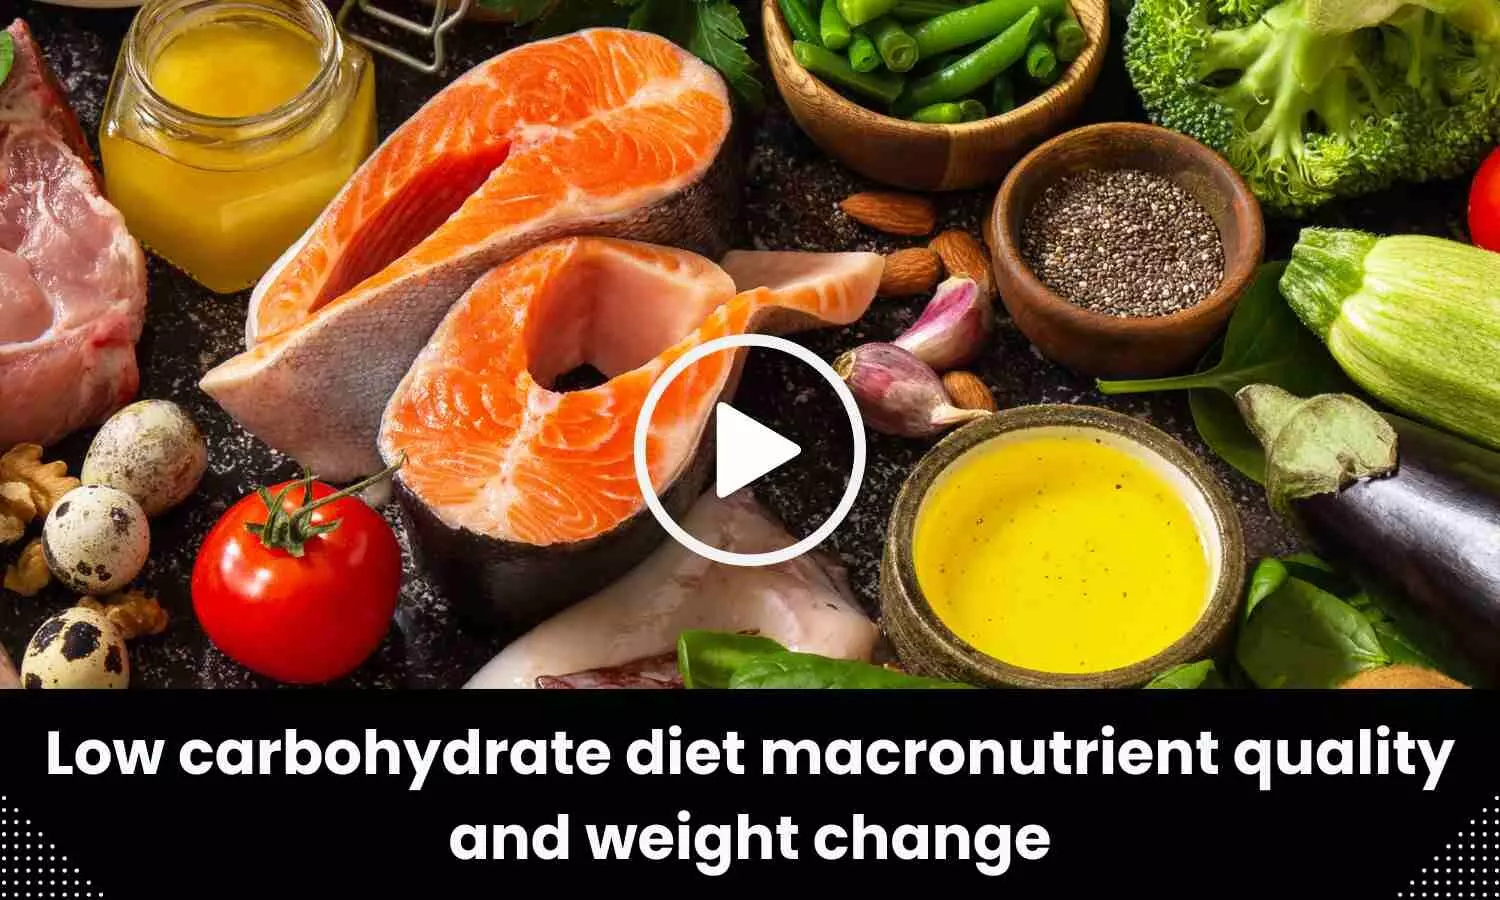 Low carbohydrate diet macronutrient quality and weight change